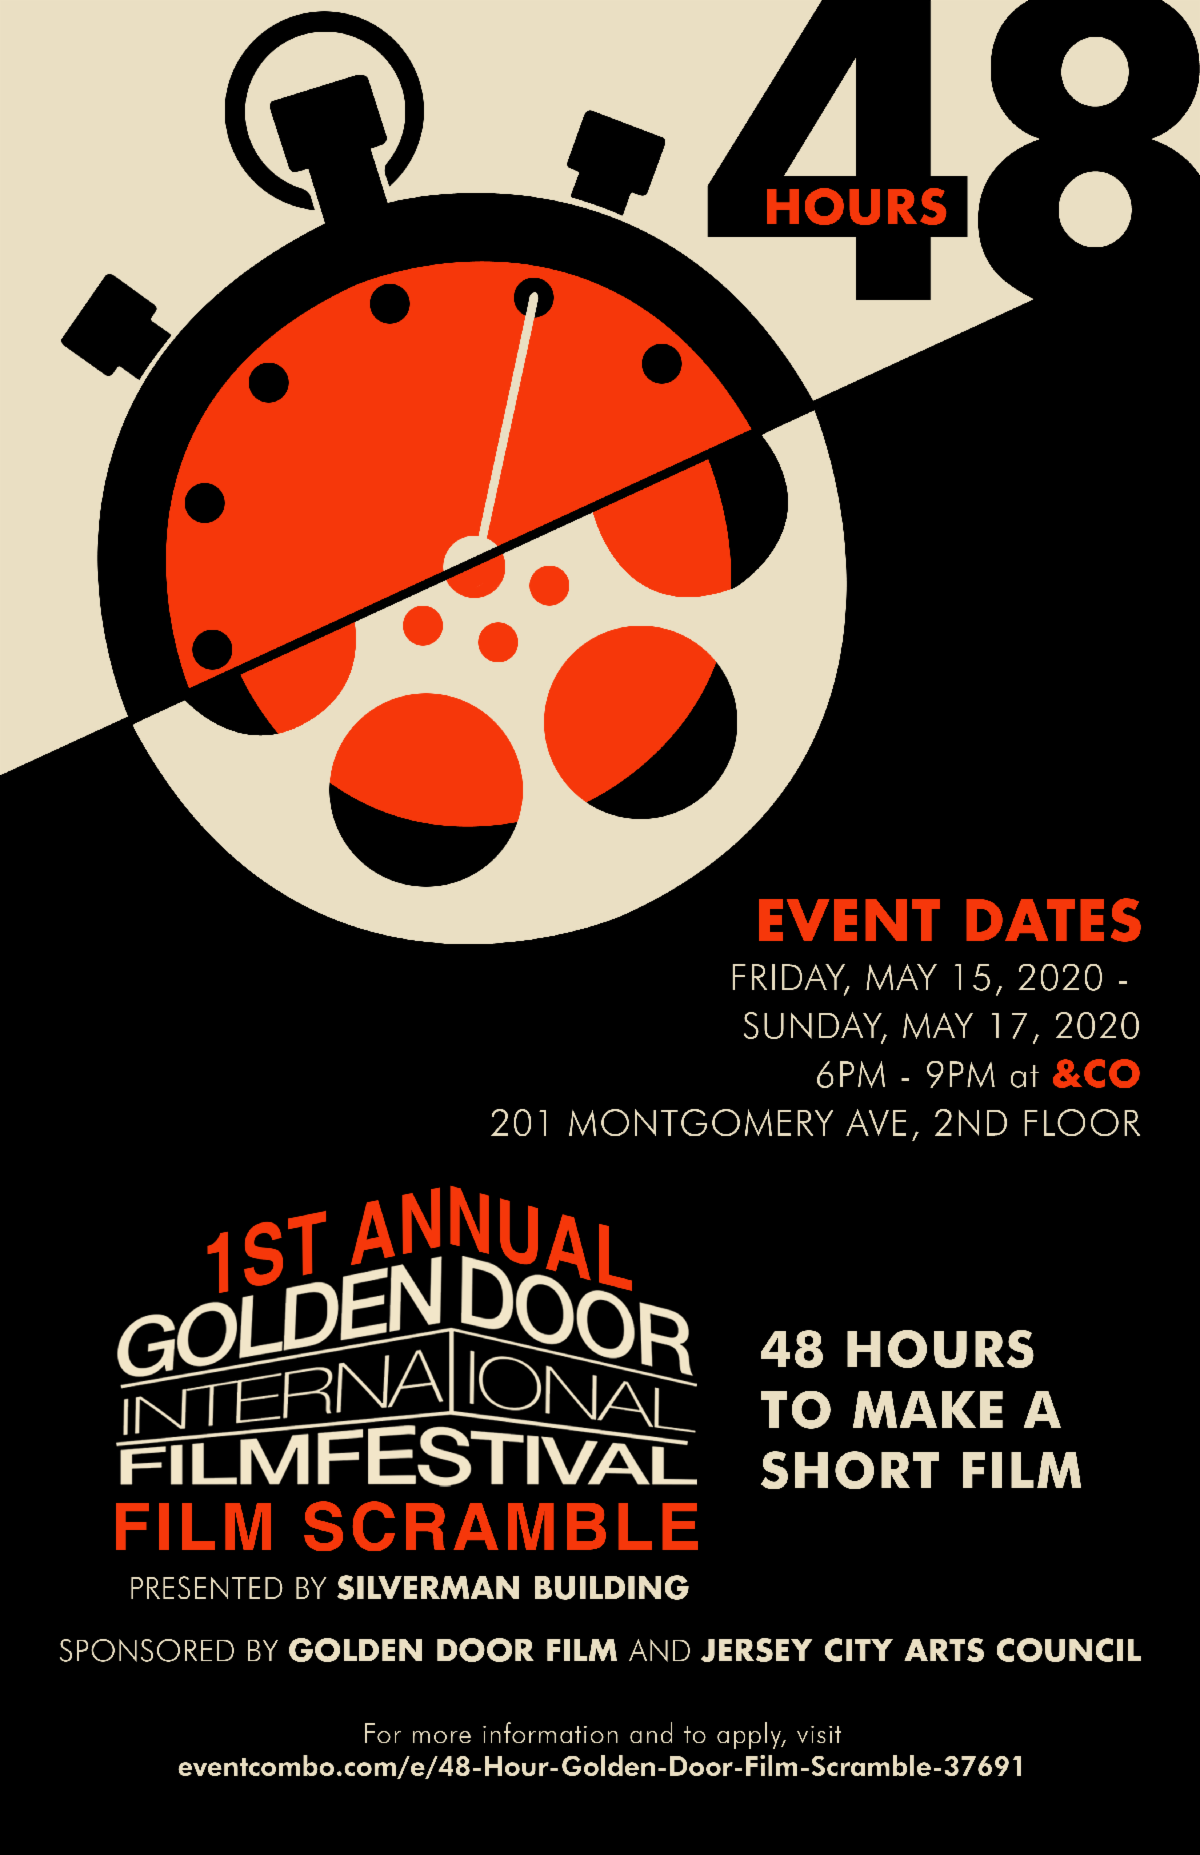 flyer for 1st annual golden door international film festival film scramble; event dates: friday, may 15th 2020-Sunday May 17th 2020 6pm-9pm at &CO 201 Montgomery Ave, 2nd Floor